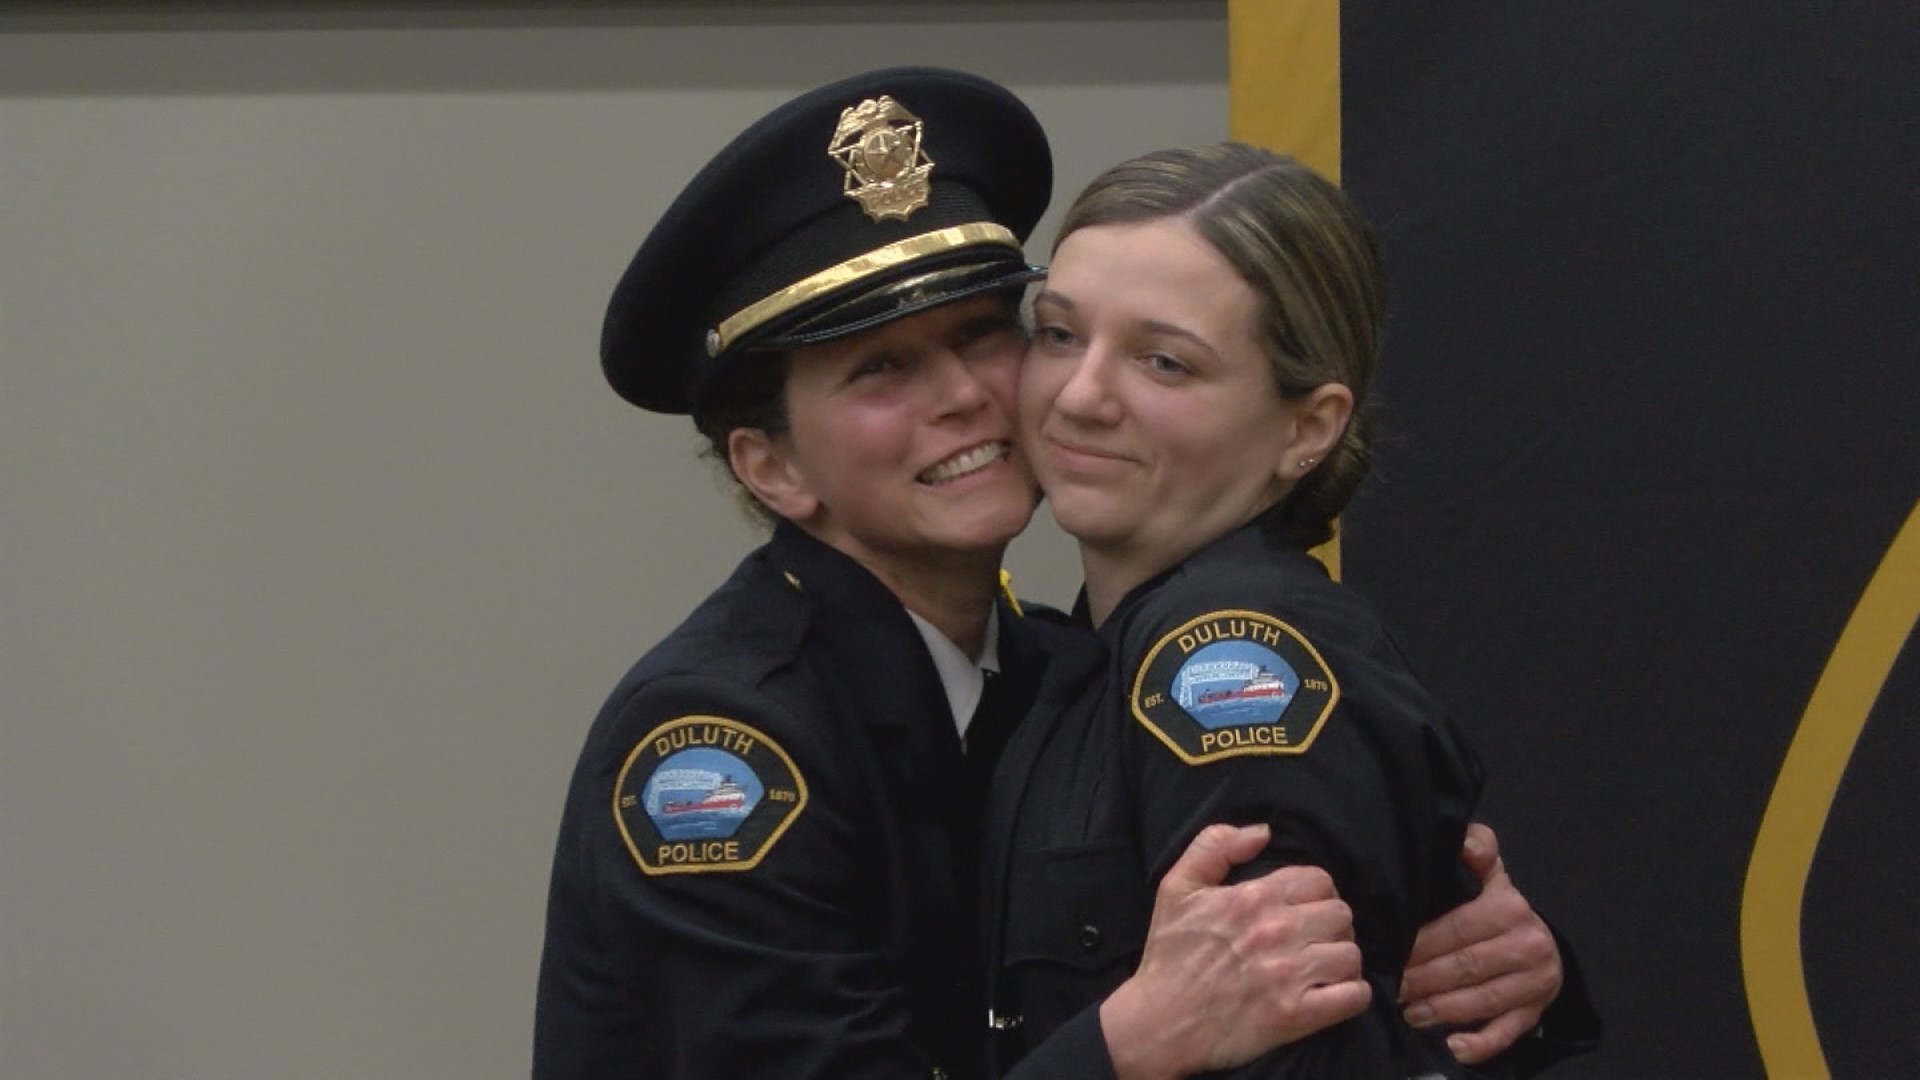 Duluth PD Investigator Angela Robertson was sworn into the force in 2009. 11 years later, her daughter Maddy joined the department.